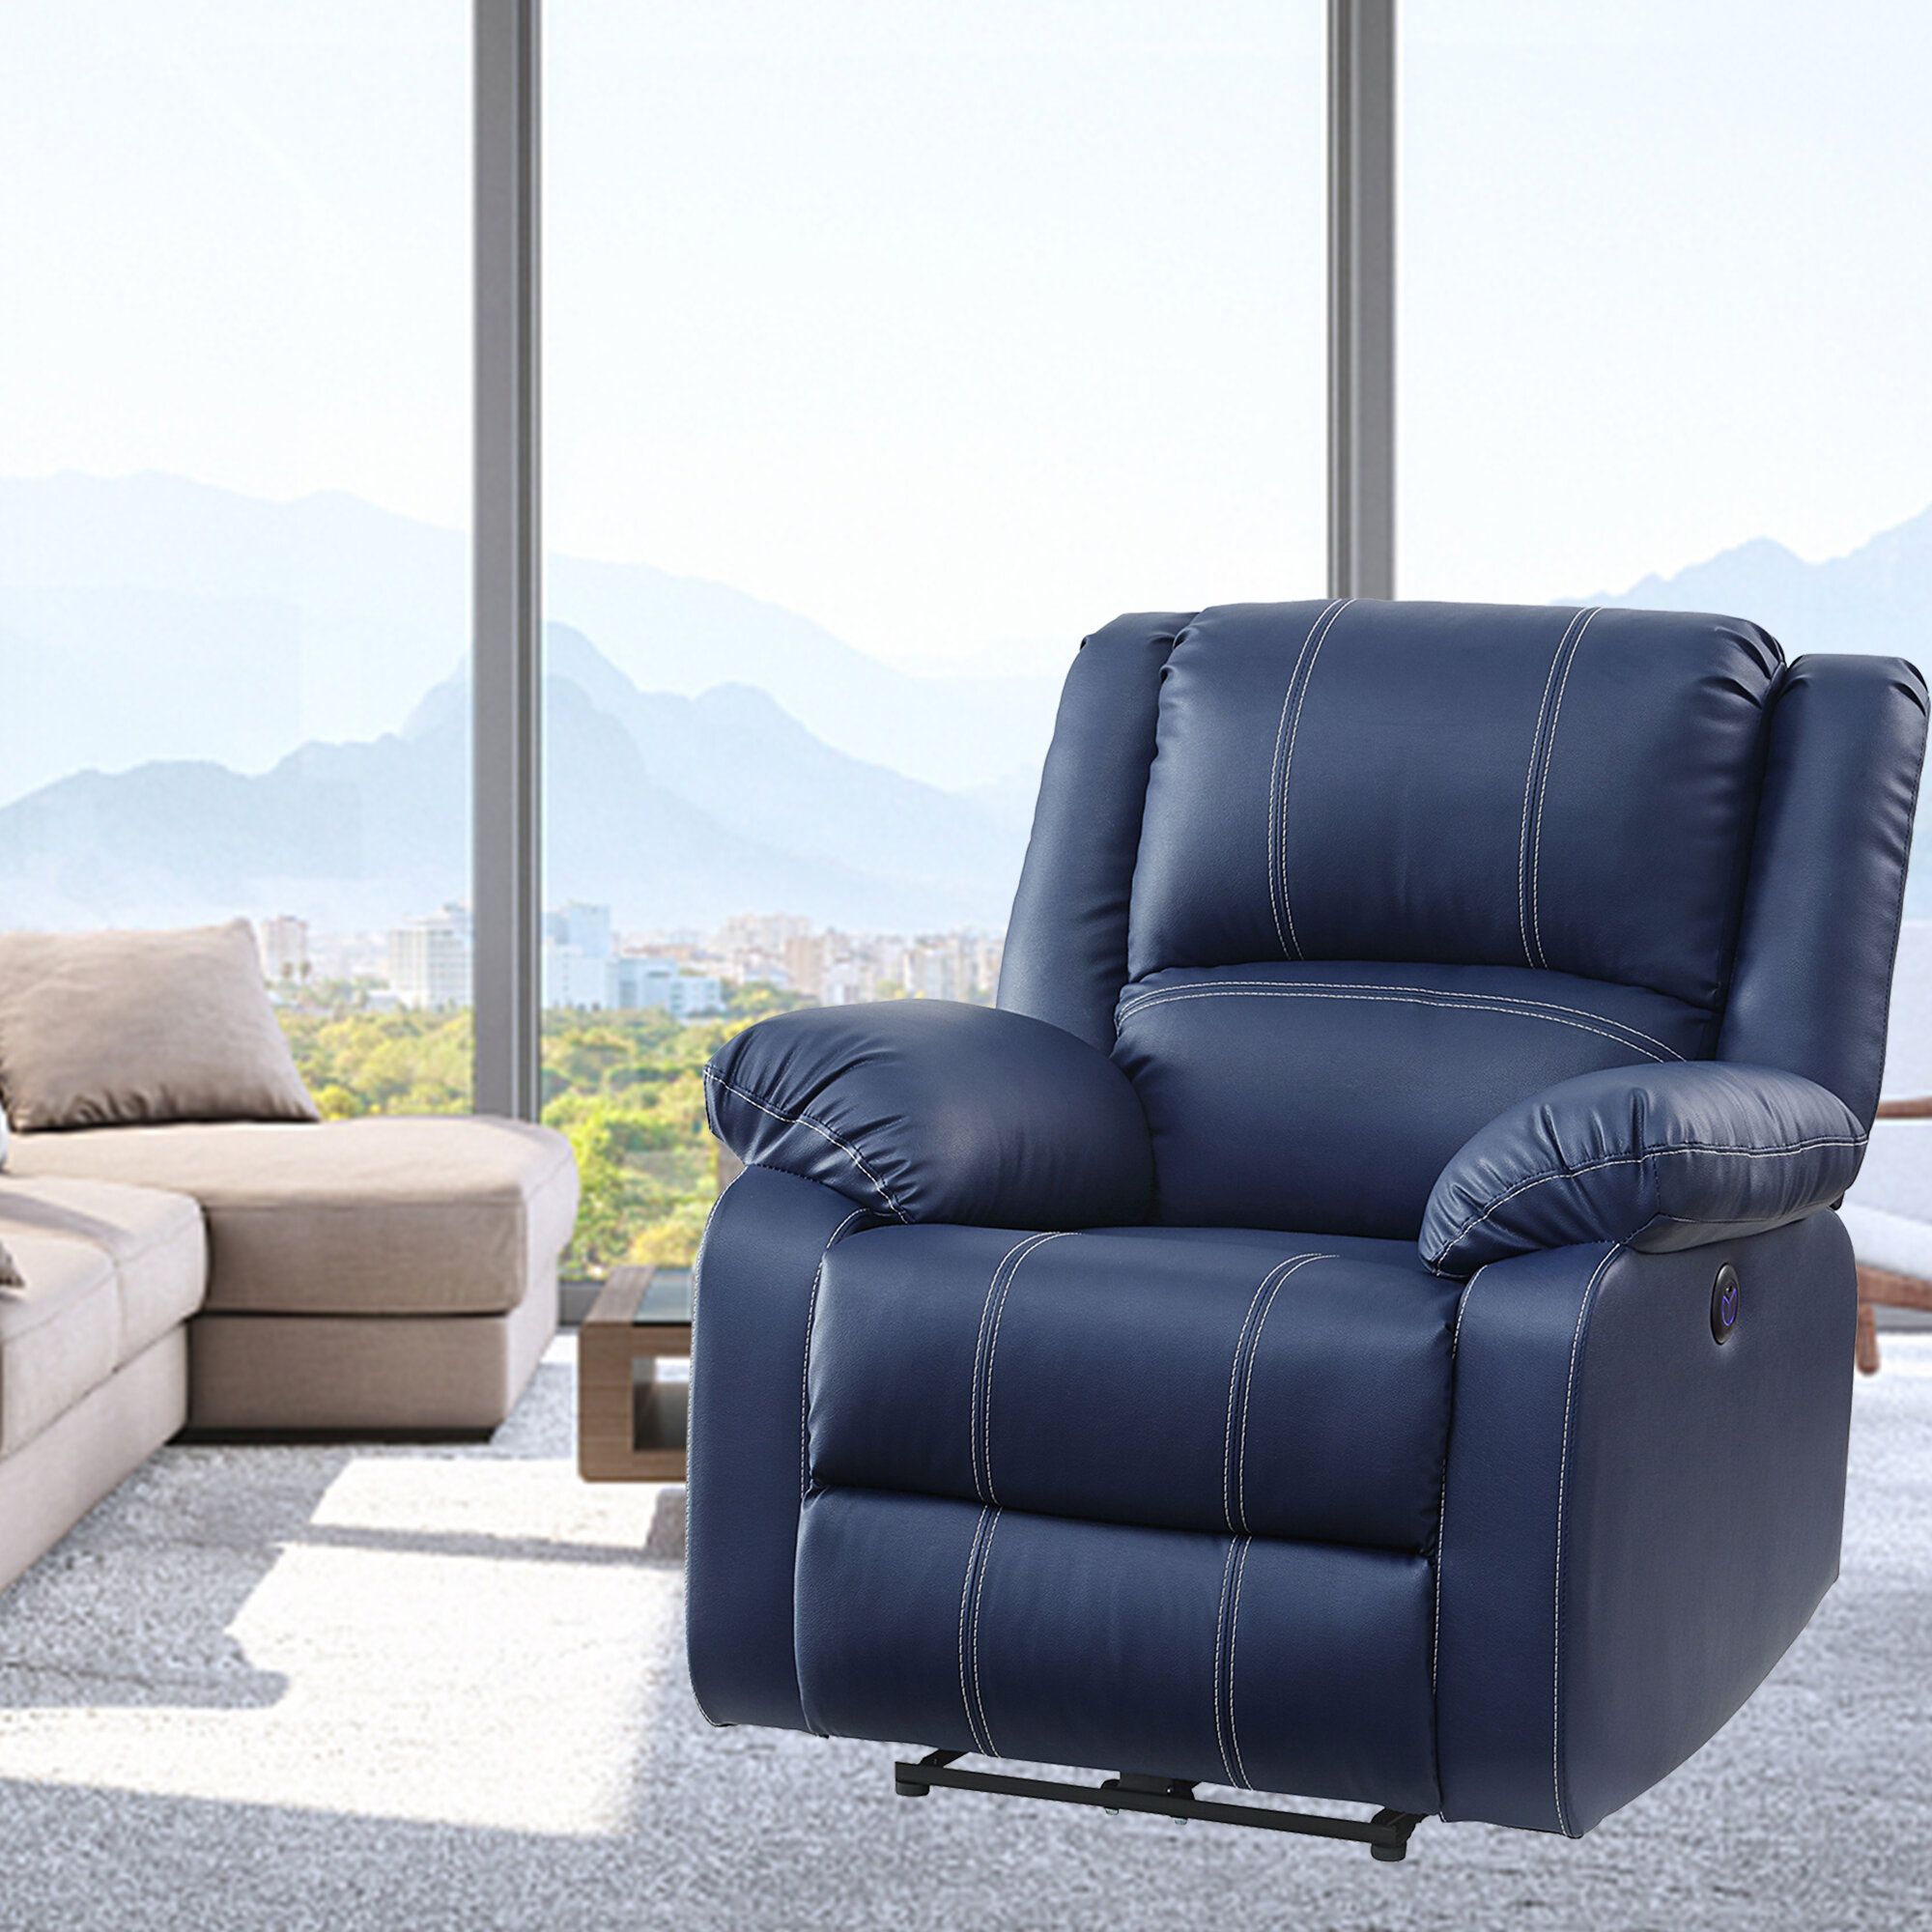 Details about   Gaming Recliner Chair PU Leather Sofa Adjustable Modern Single Reclining Chair 